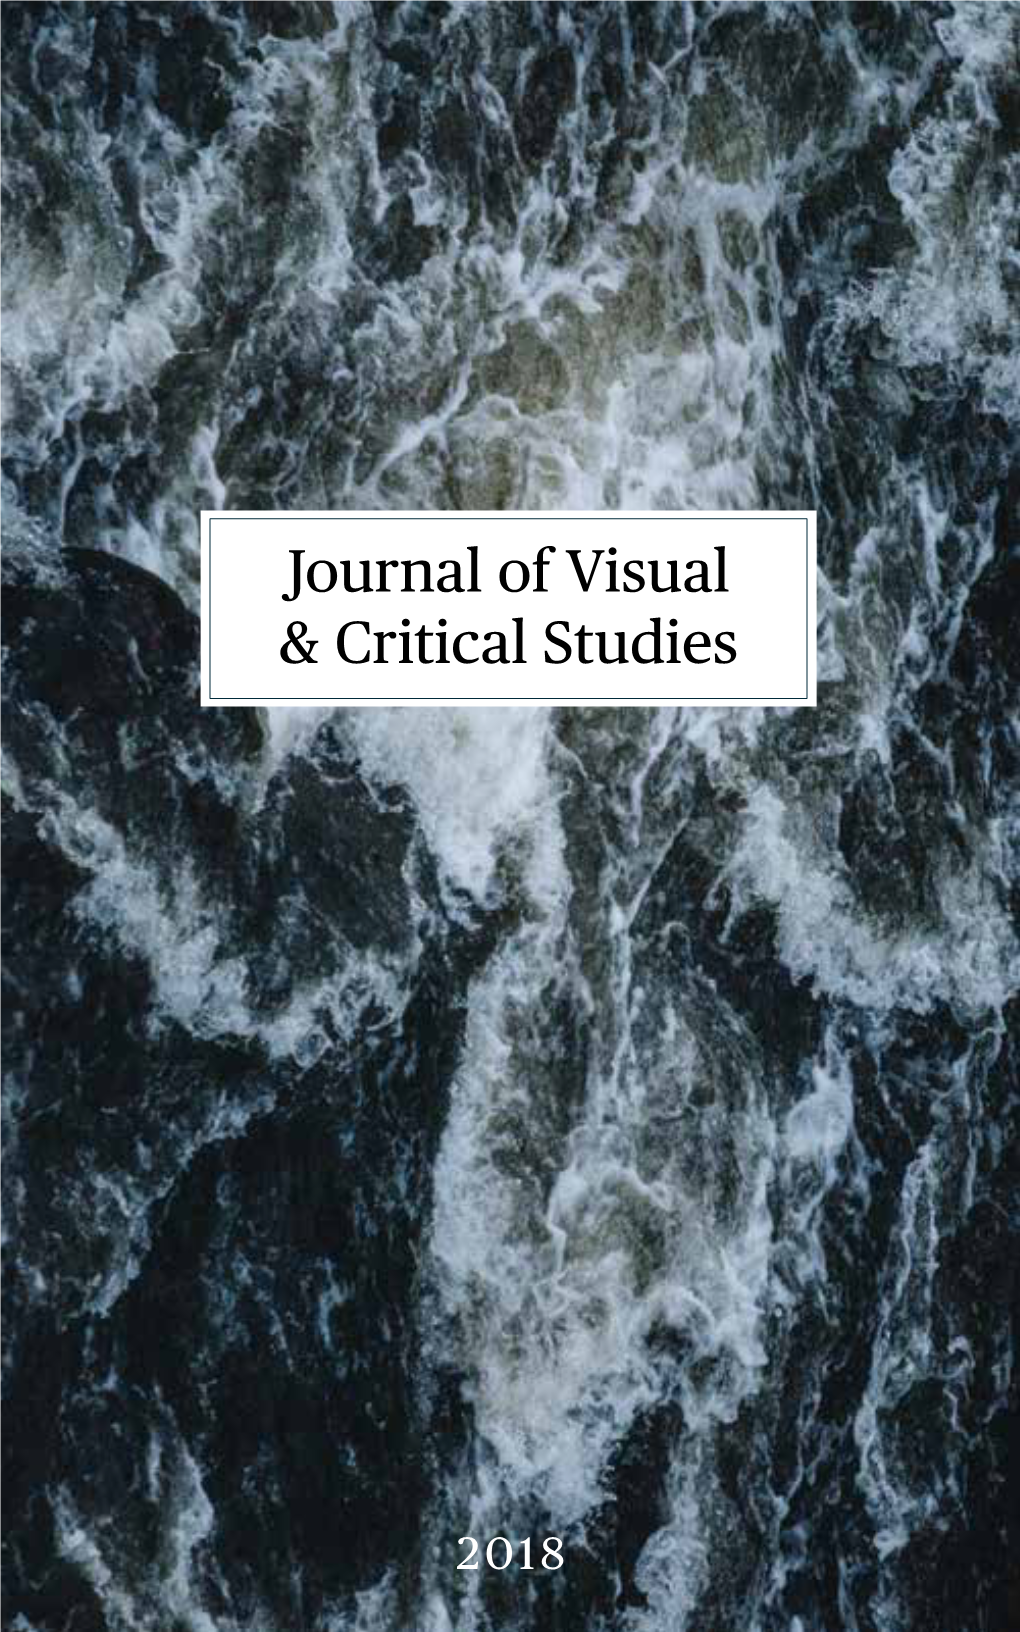 2018 Journal of Visual and Critical Studies